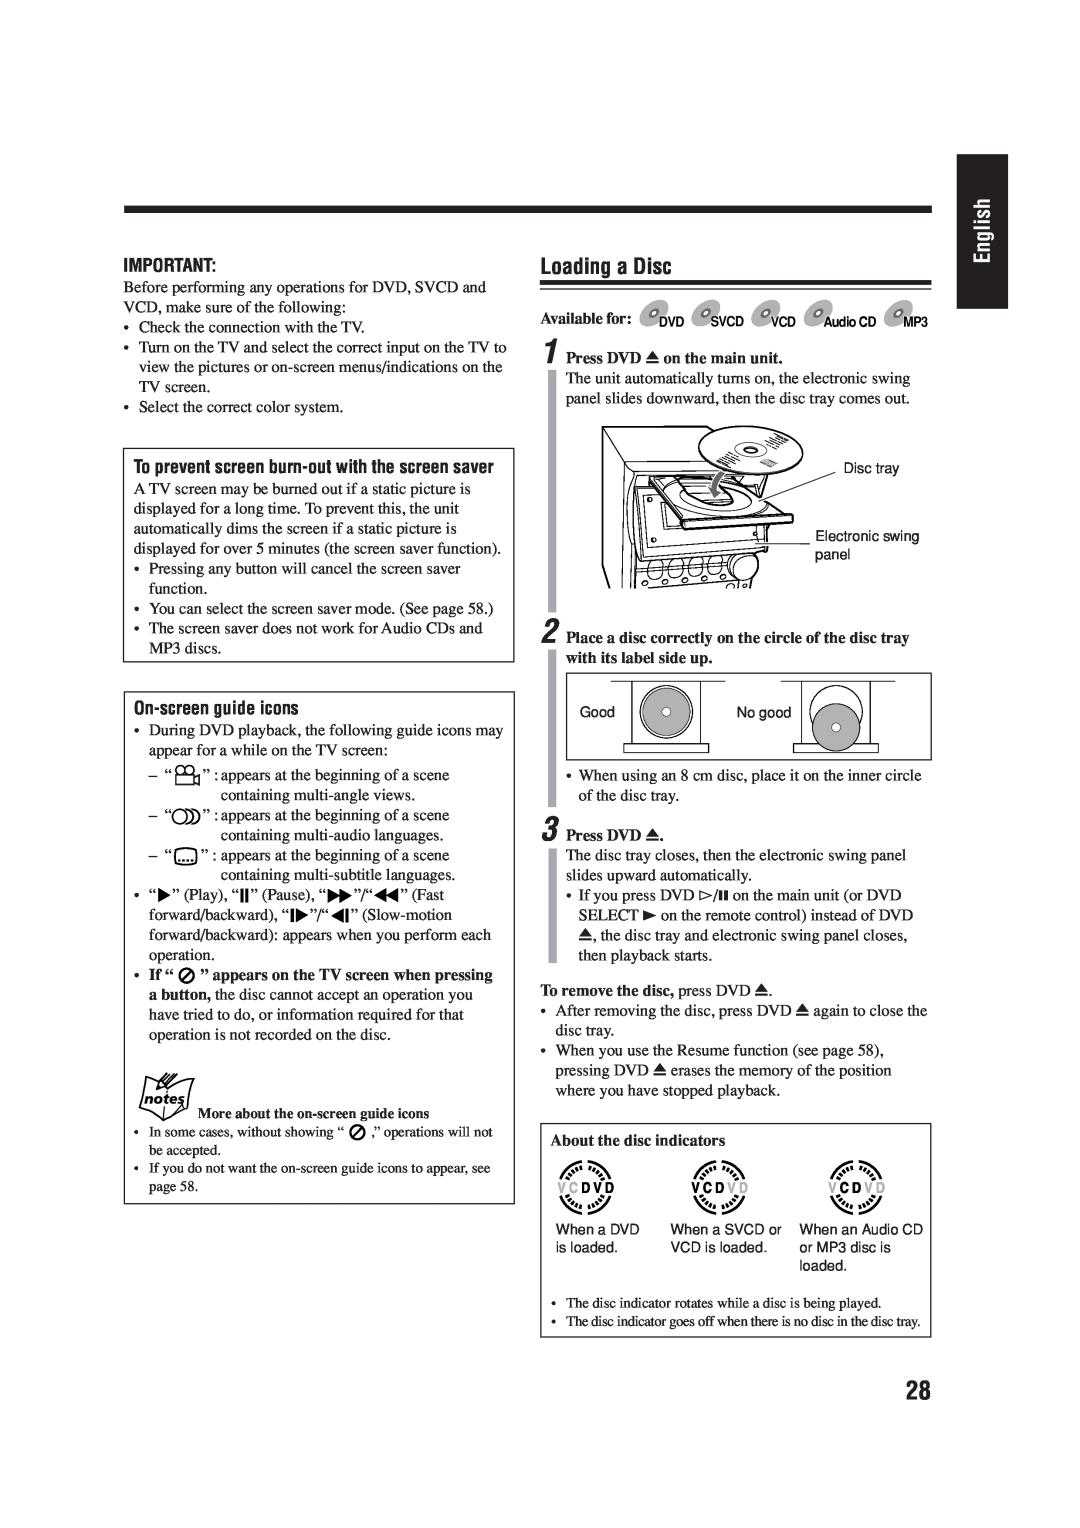 JVC LVT0954-007A manual Loading a Disc, English, On-screenguide icons, To prevent screen burn-outwith the screen saver 